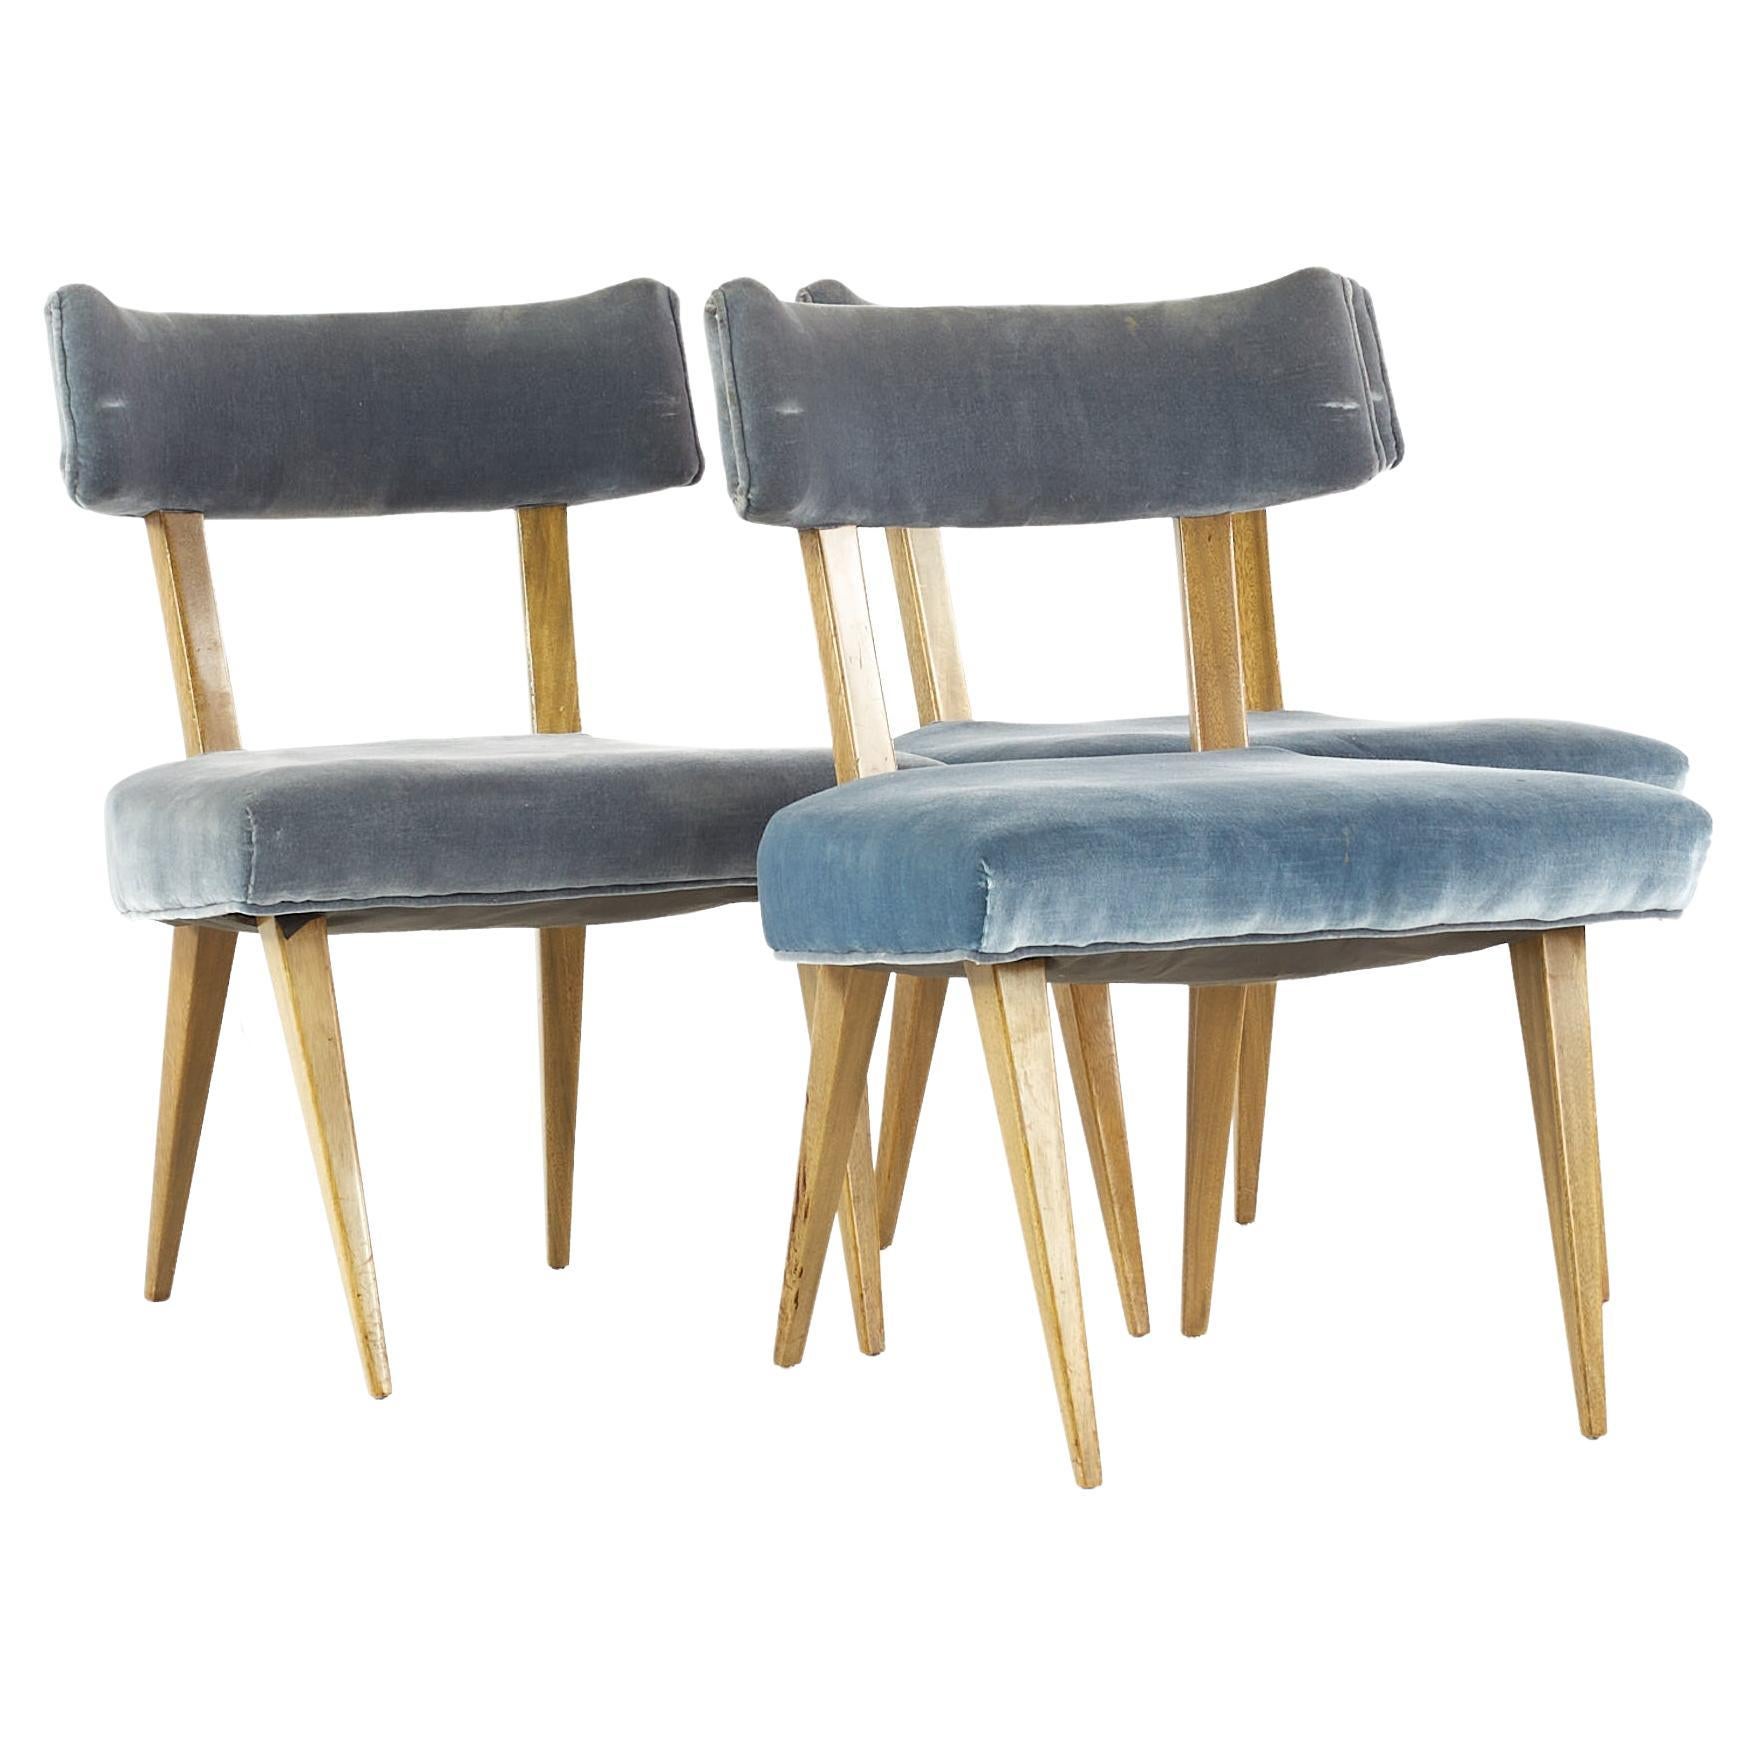 Robsjohn Style Mid Century Dining Chairs - Set of 3 For Sale